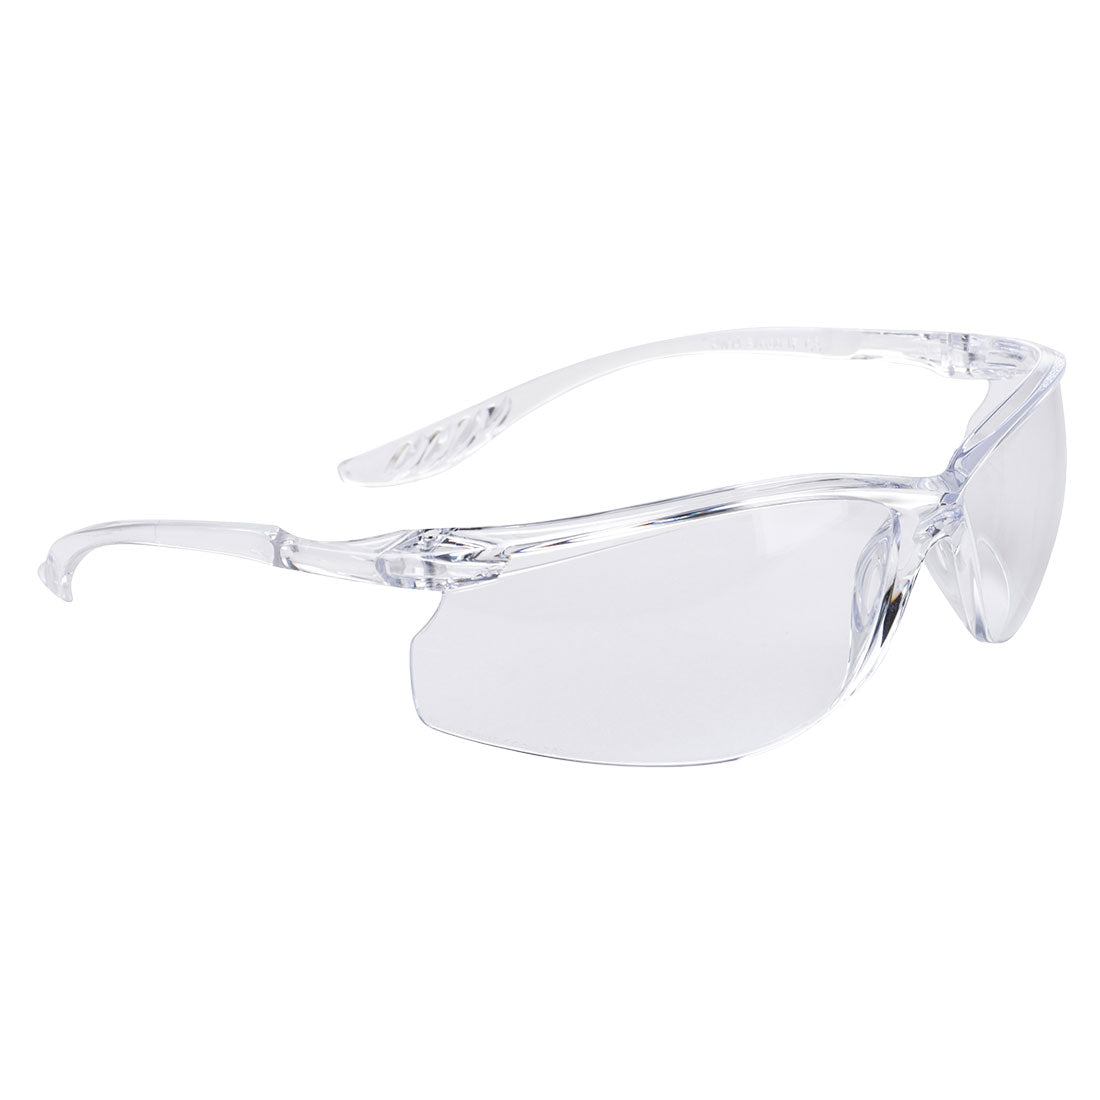 PW14 - Lite Safety Glasses (Pack of 5)